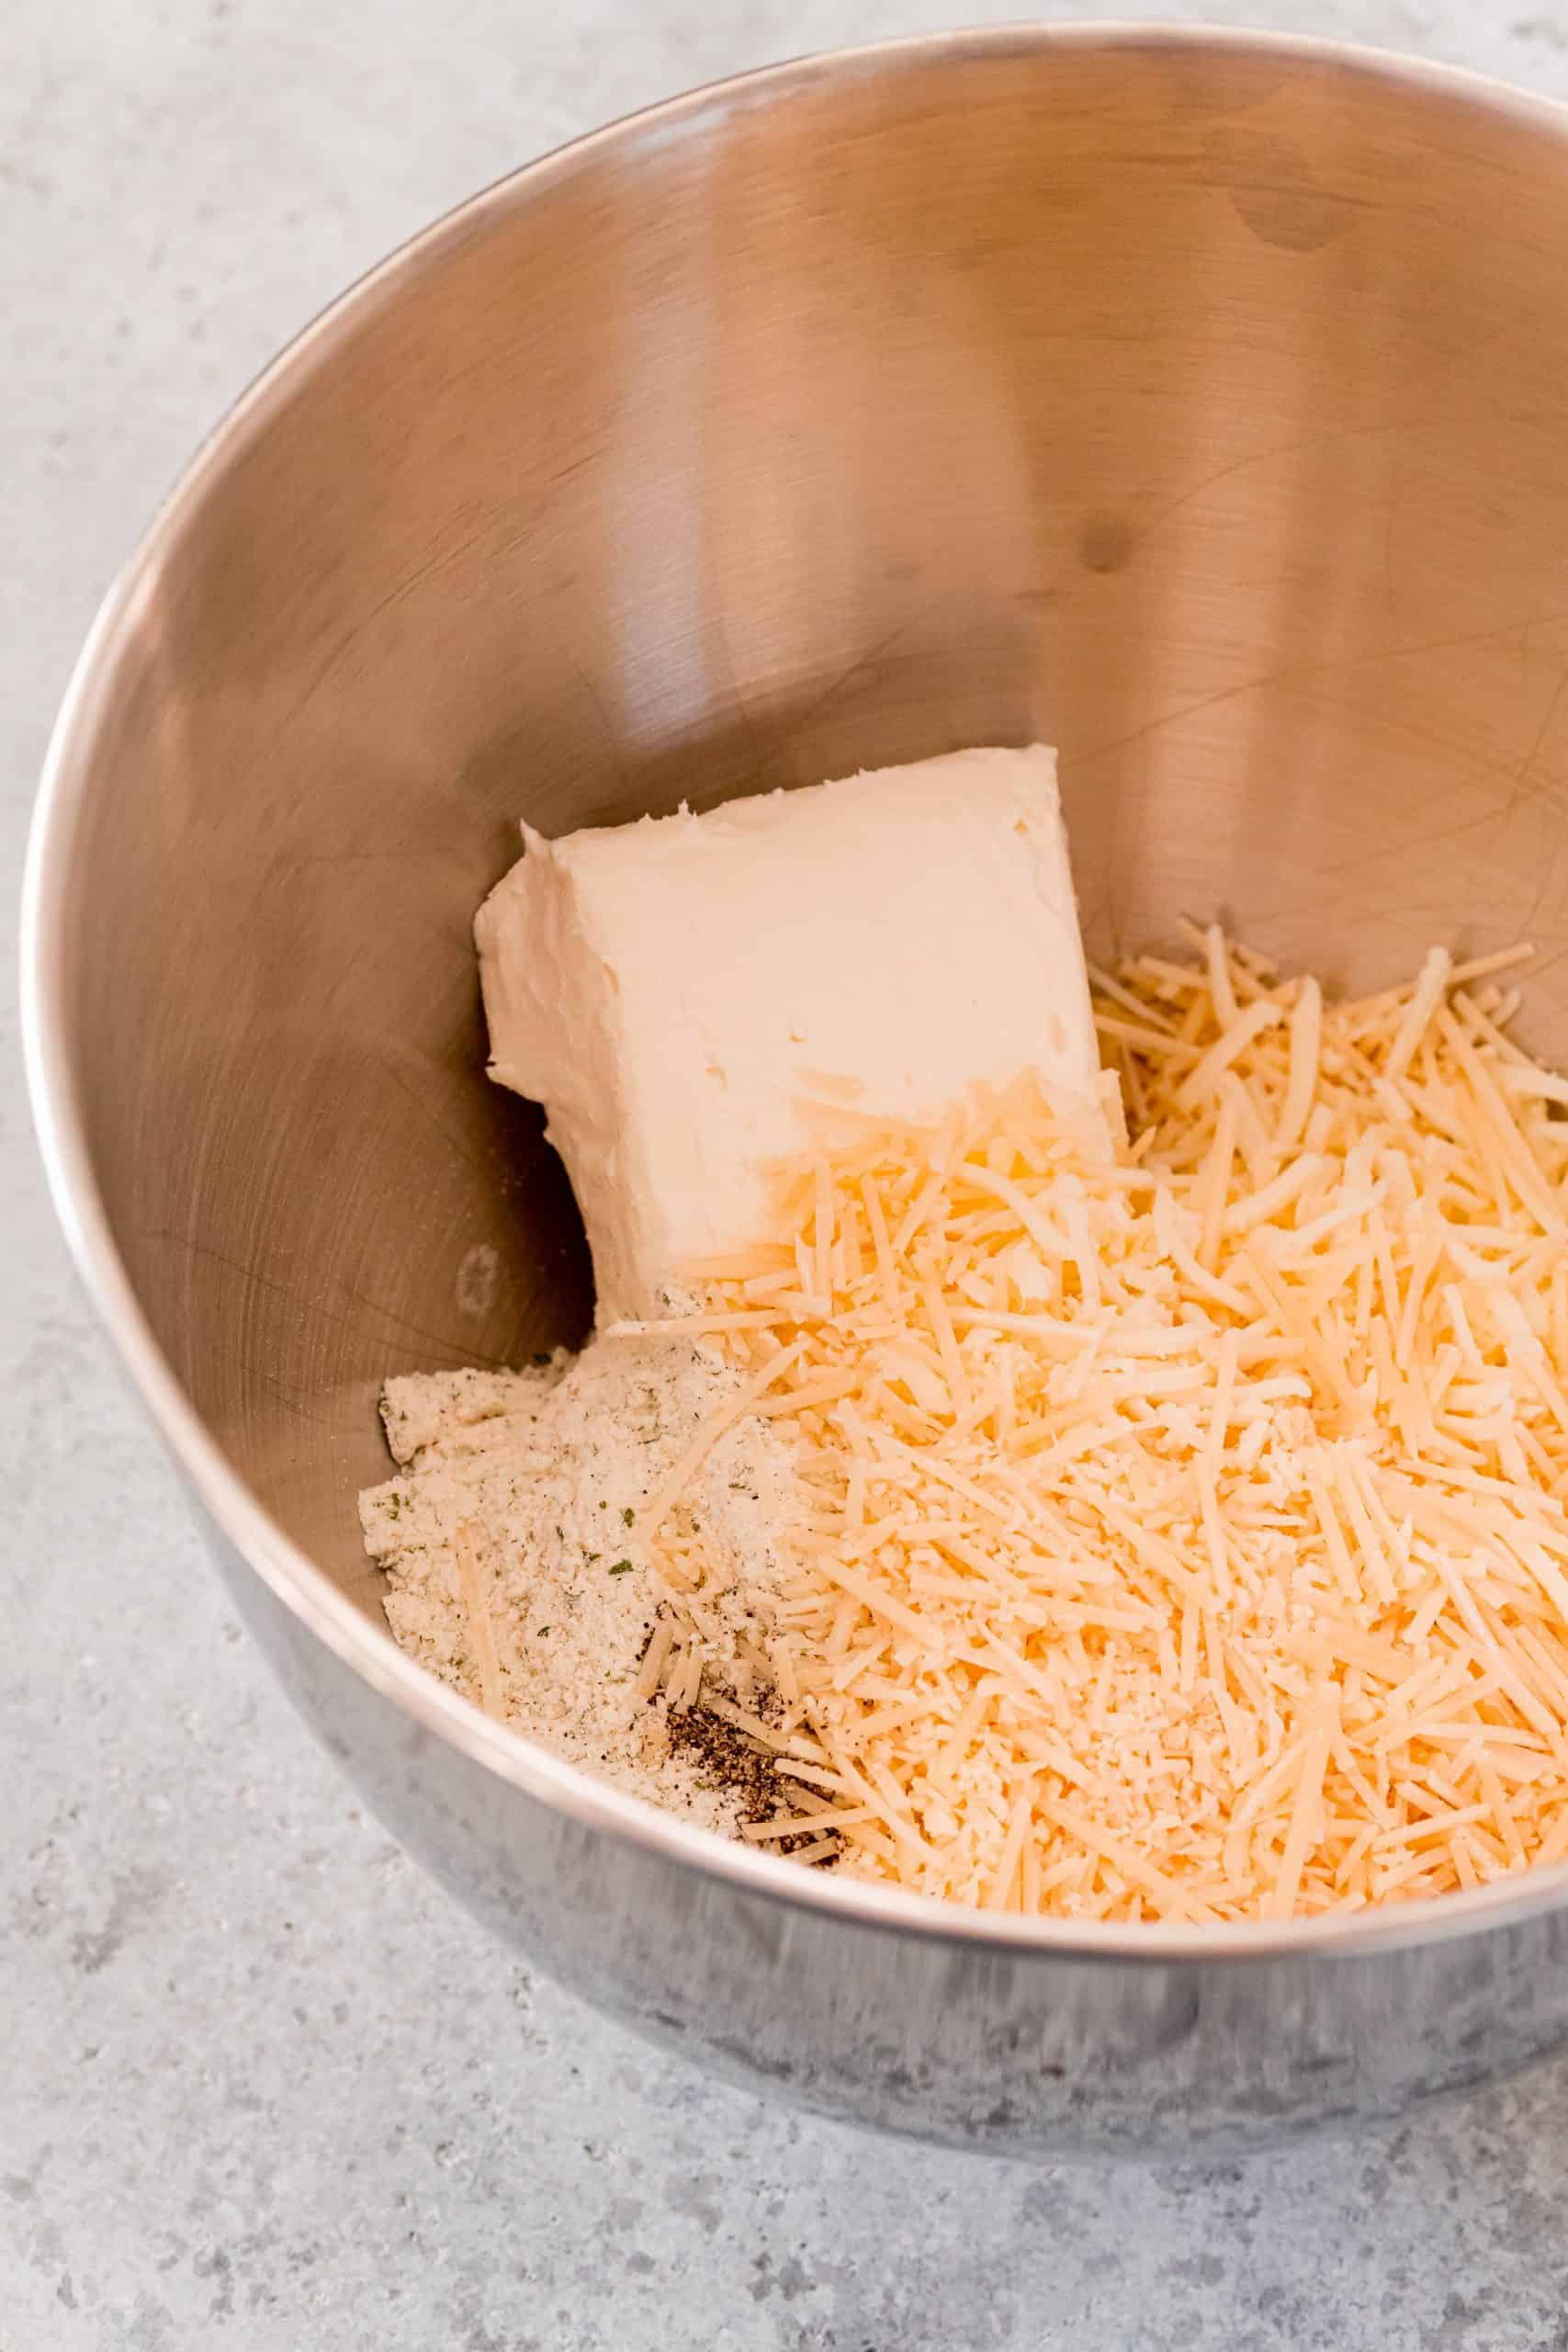 Cream cheese, cheese and spice in stand mixer bowl.